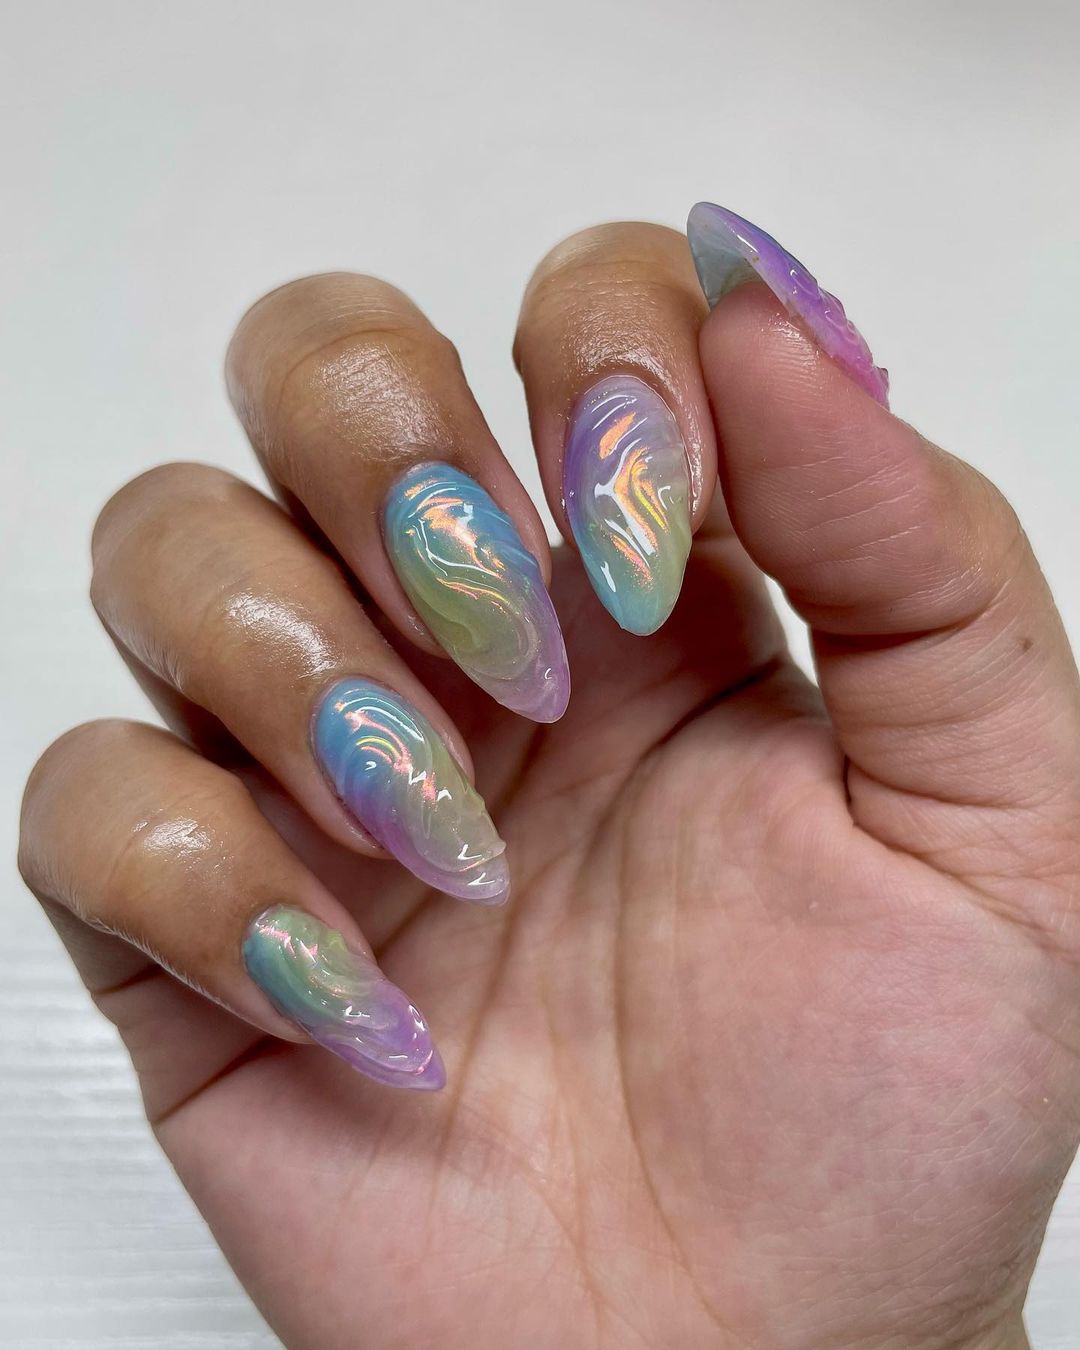 Almond Nails with 3D Chrome Design